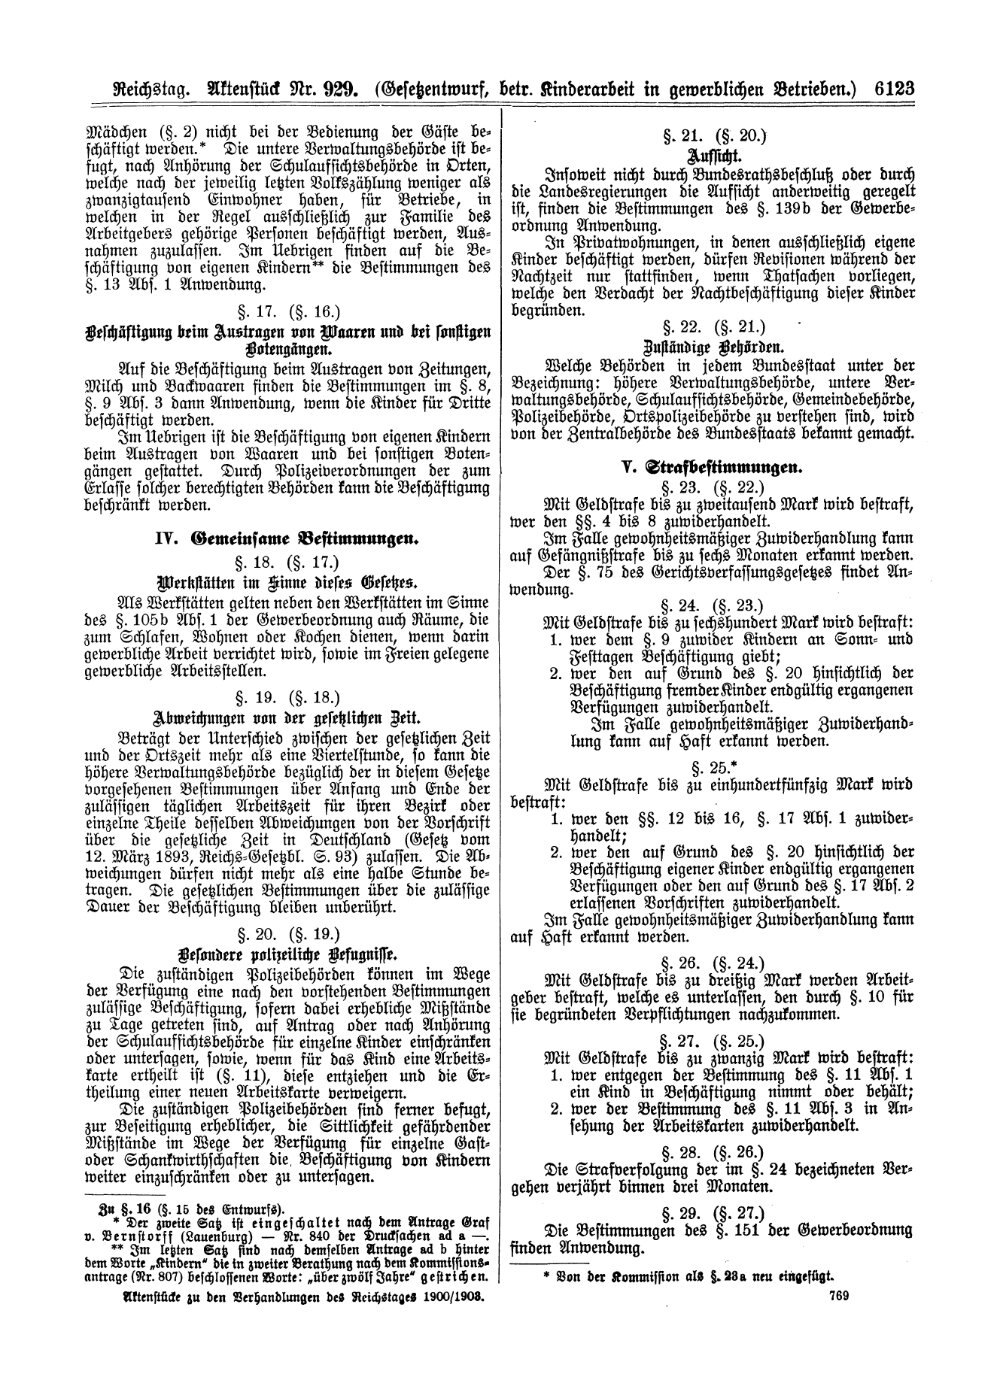 Scan of page 6123